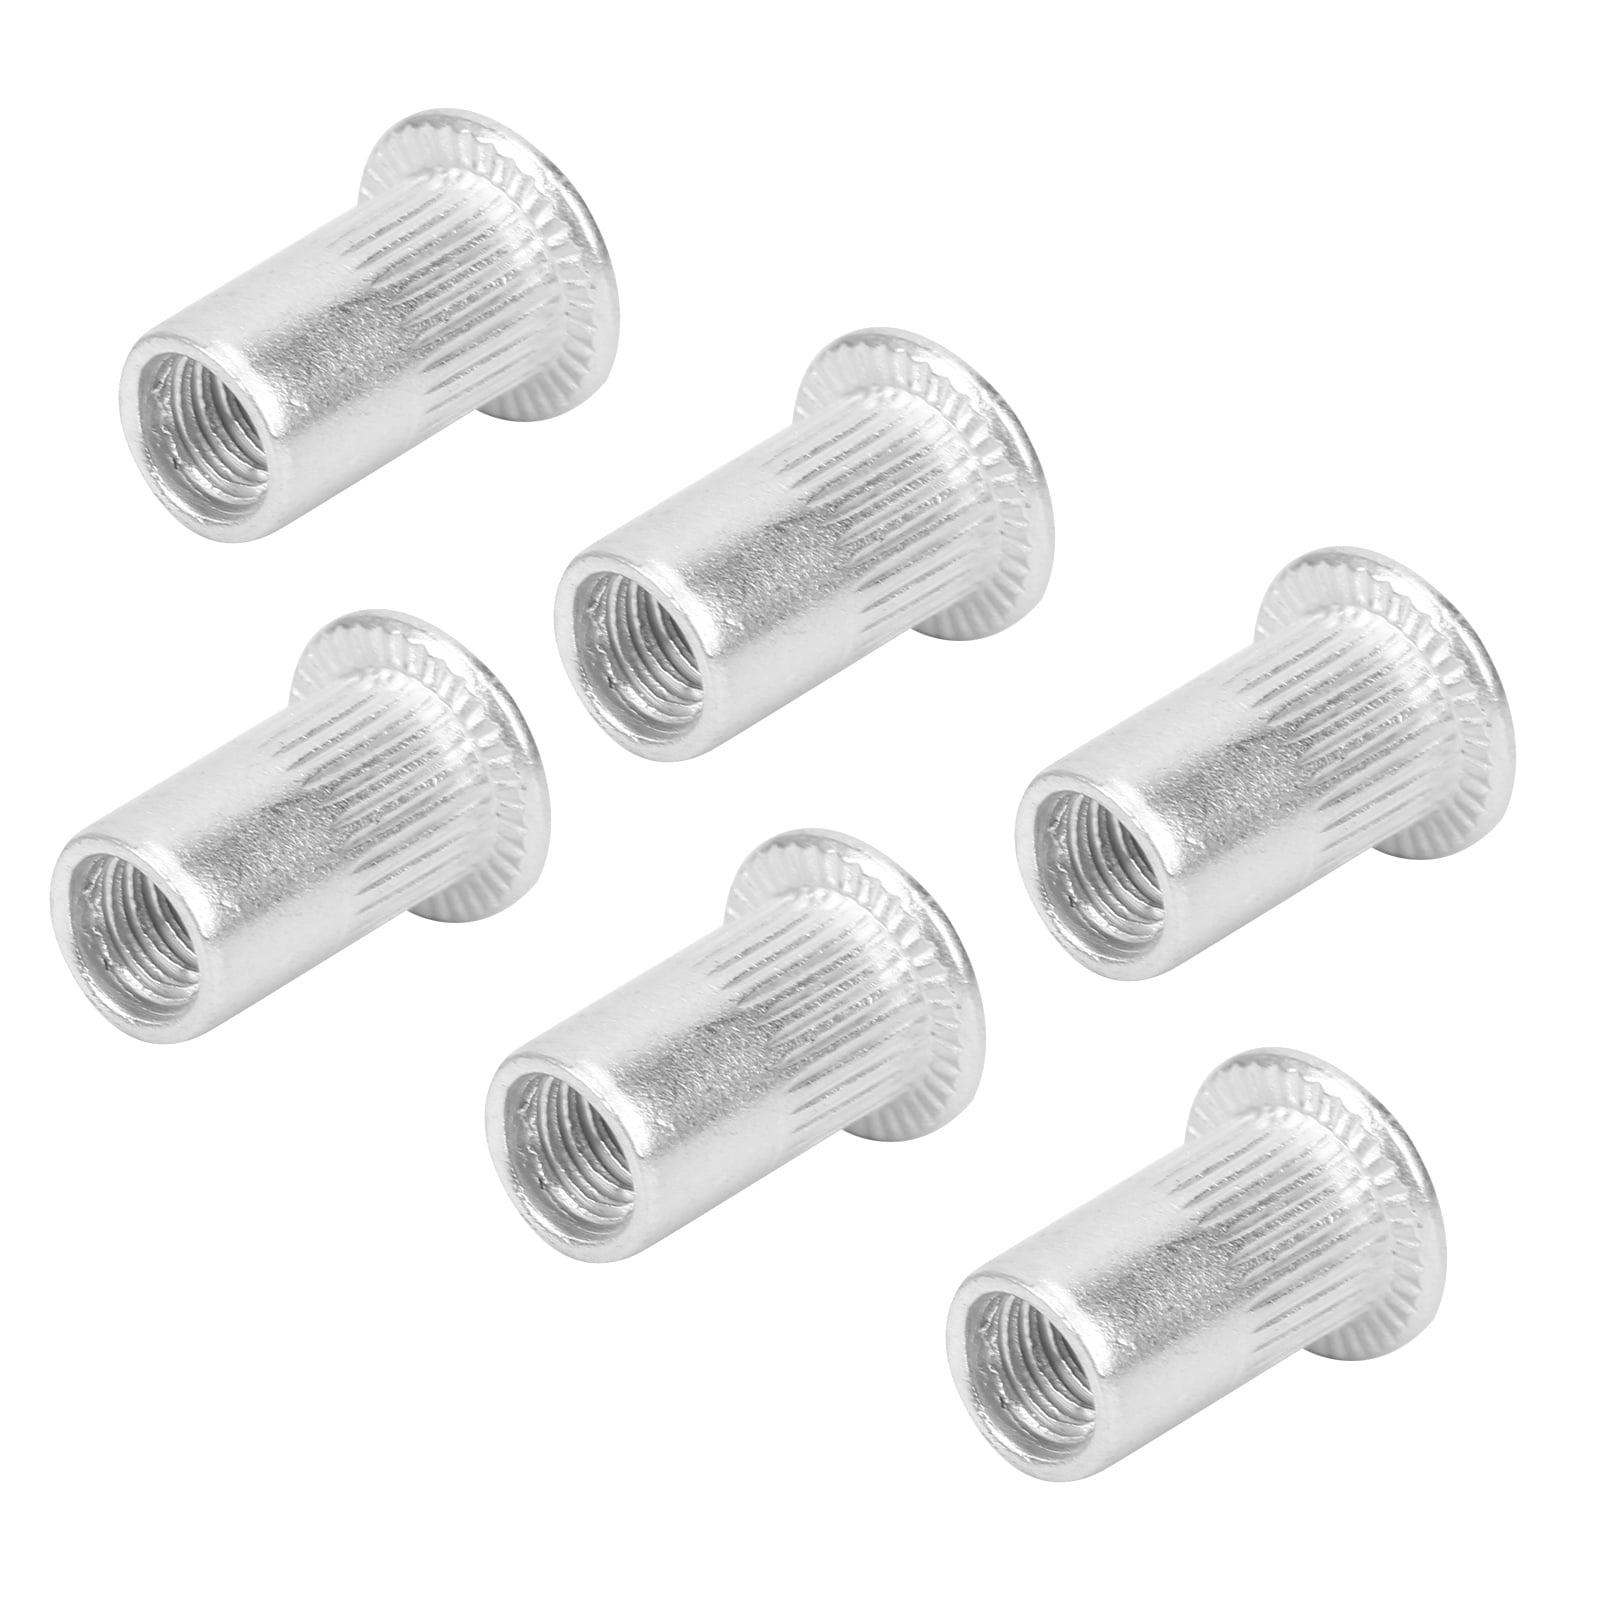 for light industrial products electromechanical Aluminum sturdy high strength Rivet Nut simple and practical Inserts Nut 